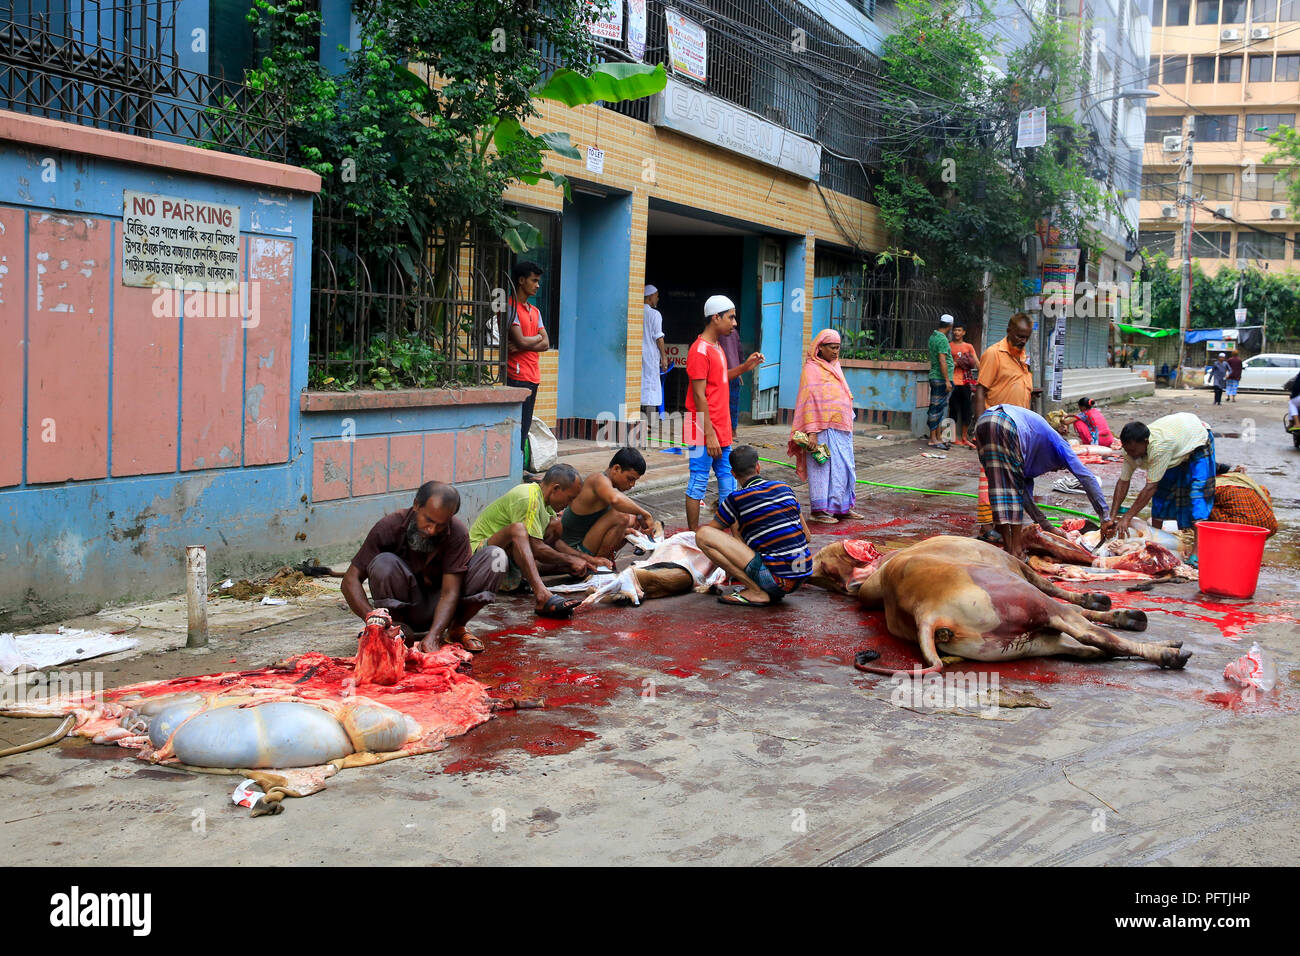 Bangladeshi Muslims slaughter their livestock on the road in Dhaka, the capital city of Bangladesh, on the first day of Eid- Ul-Azha. Dhaka, Banglades Stock Photo